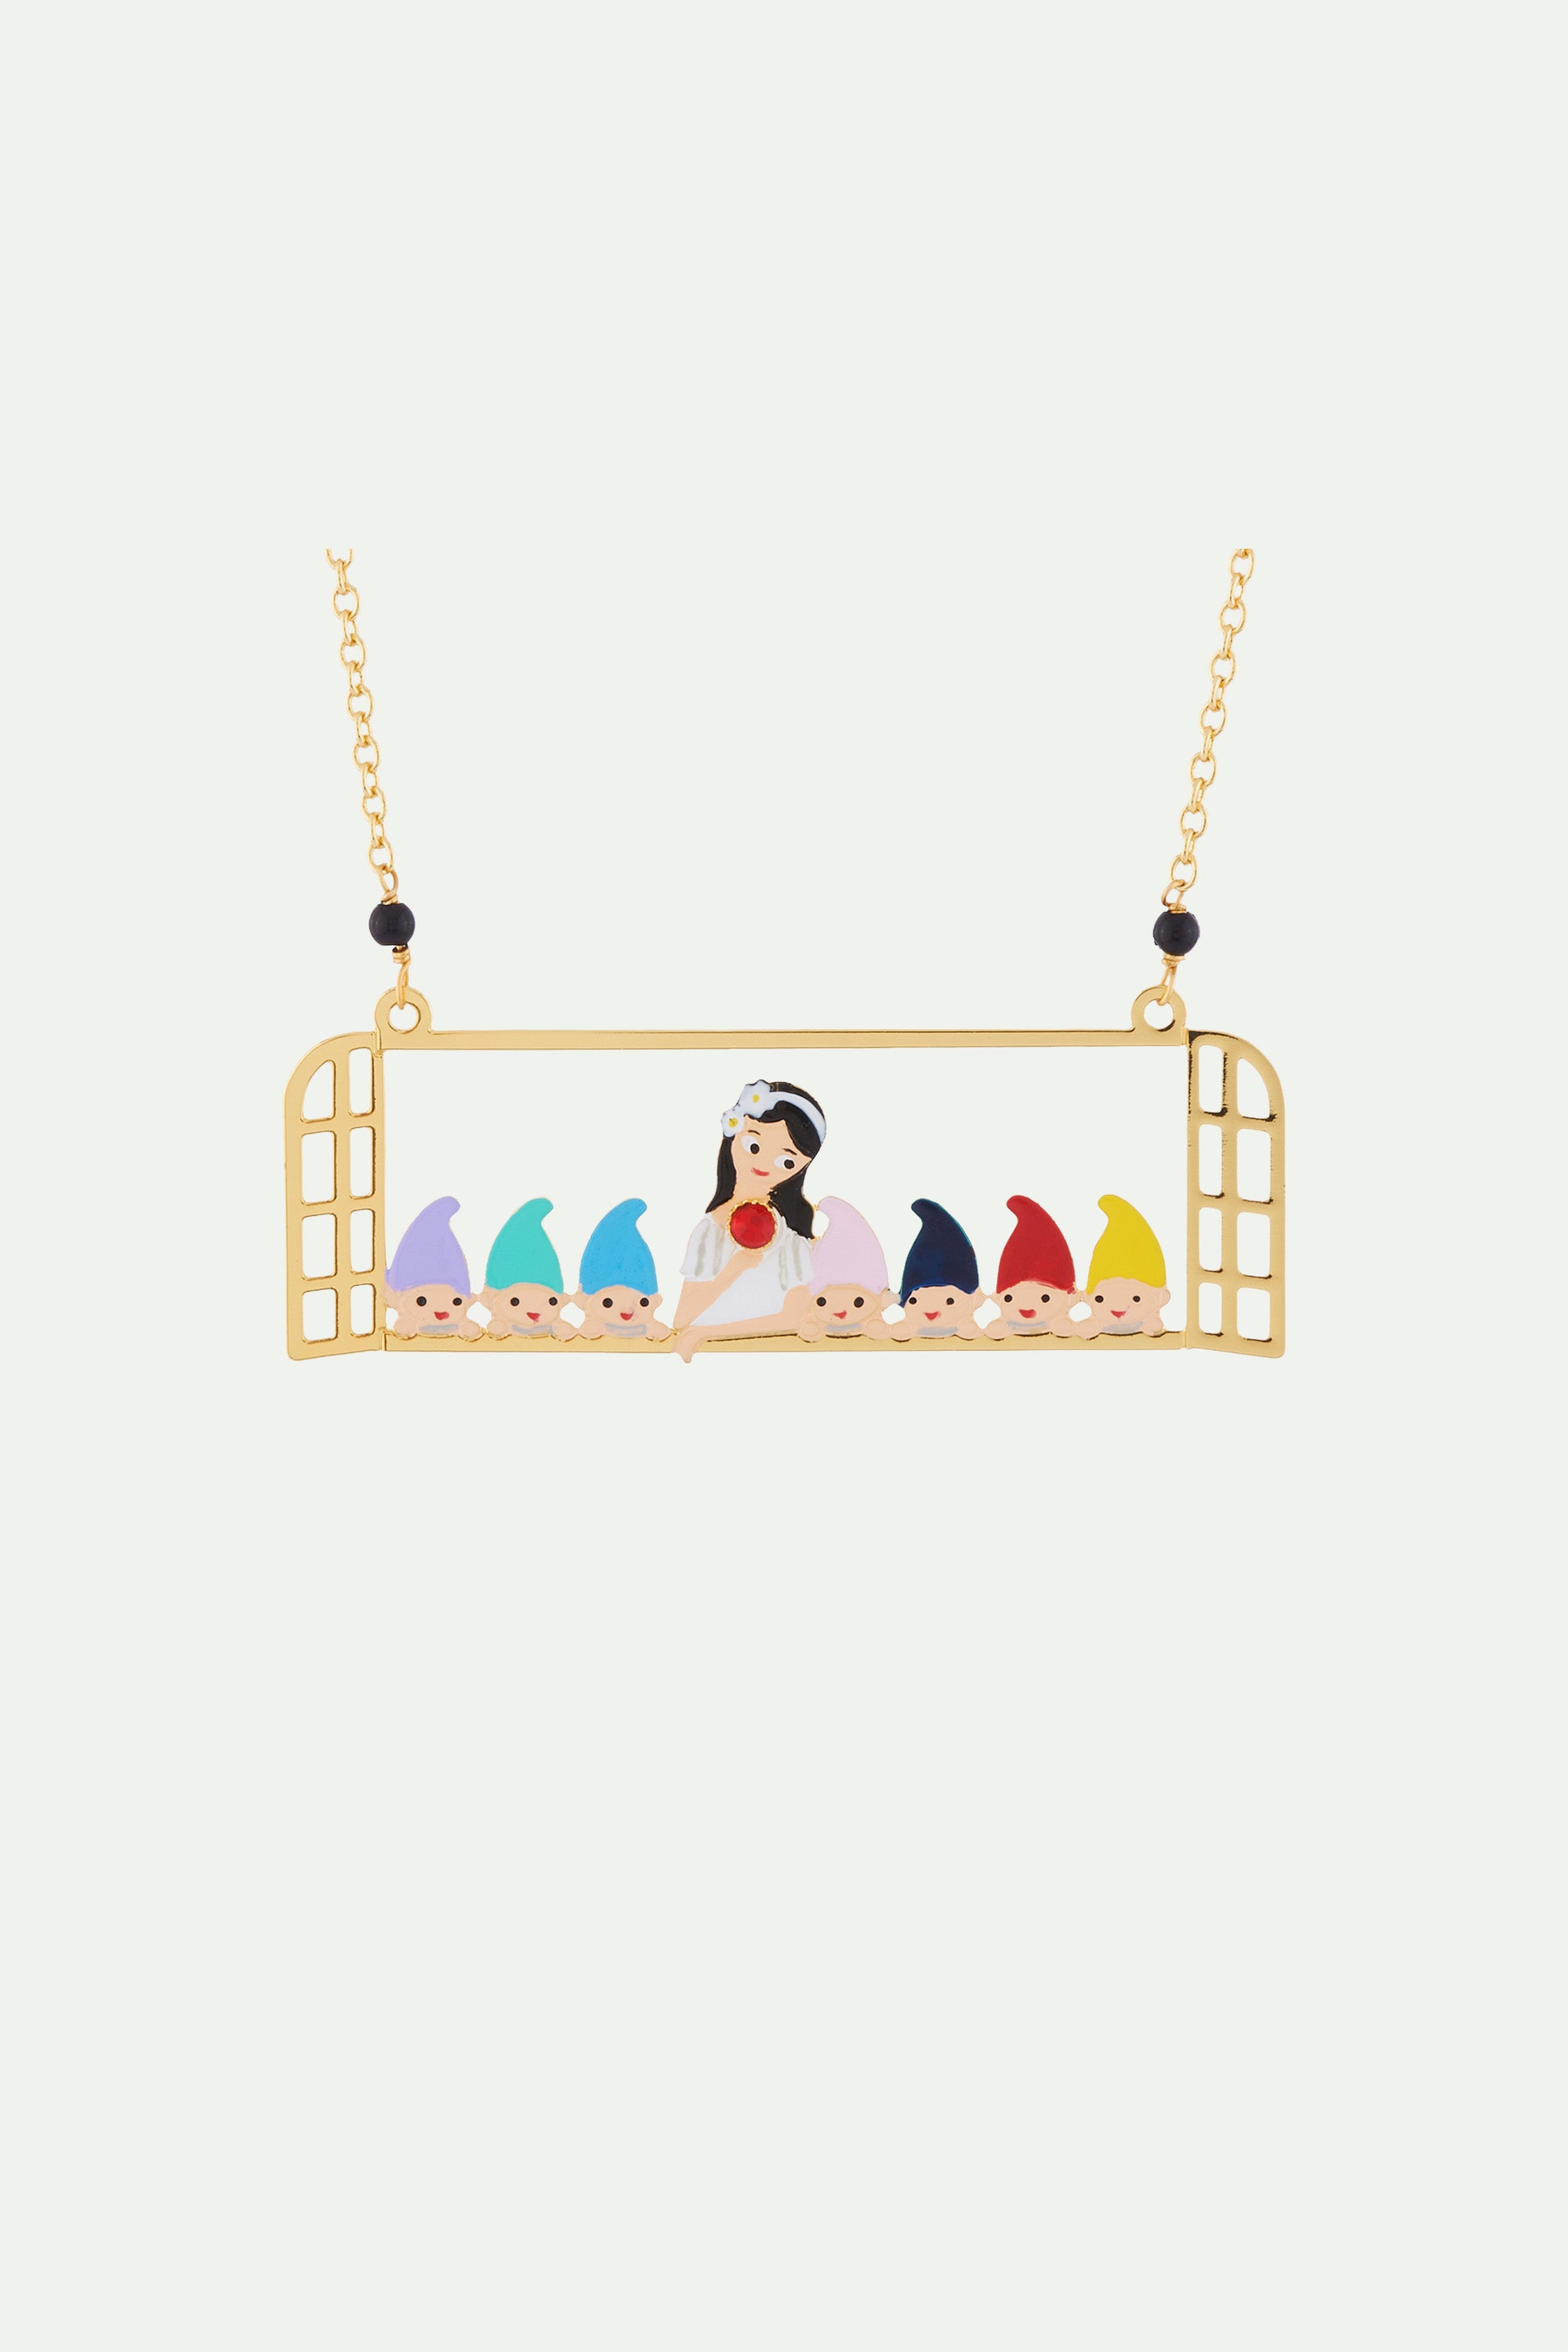 Snow White and the 7 dwarfs at the window of their ccottage necklace